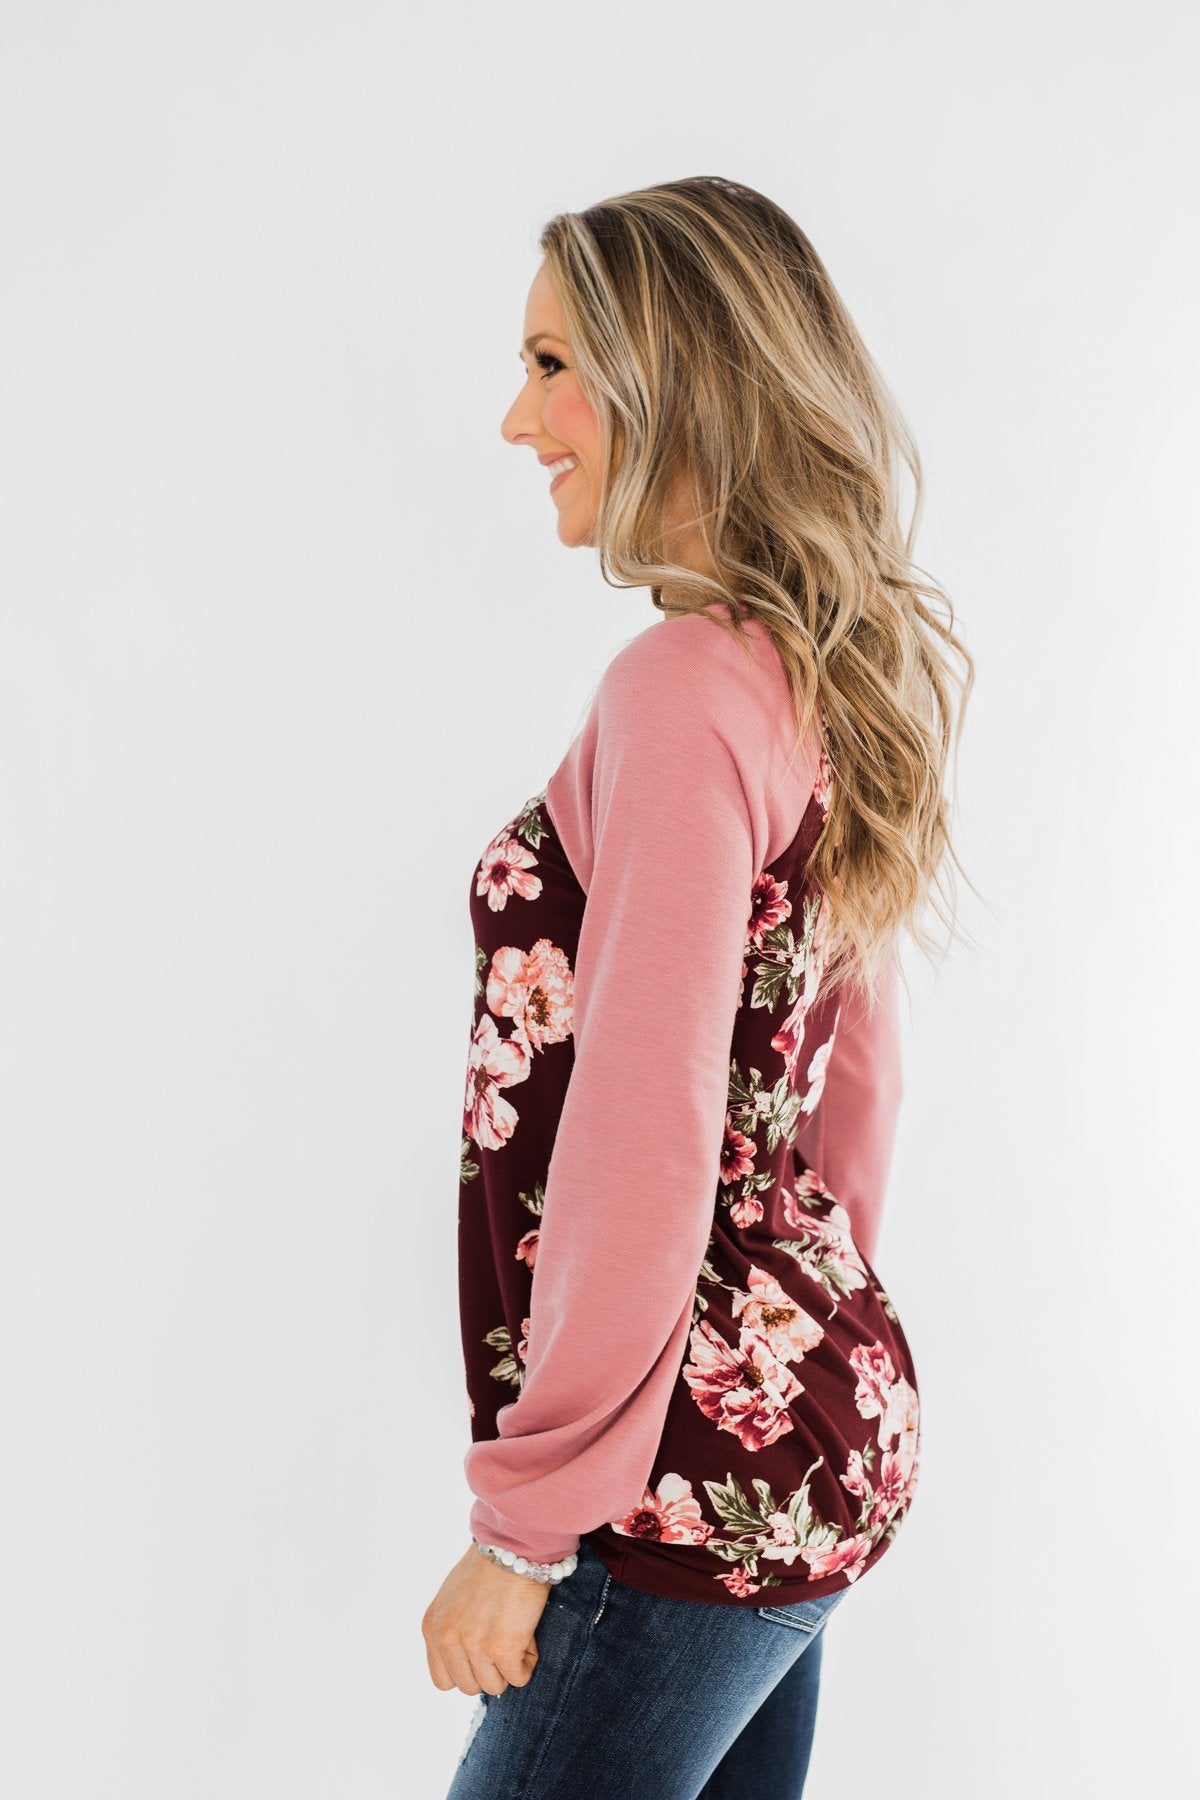 Life With You Floral Top- Mauve Pink & Burgundy